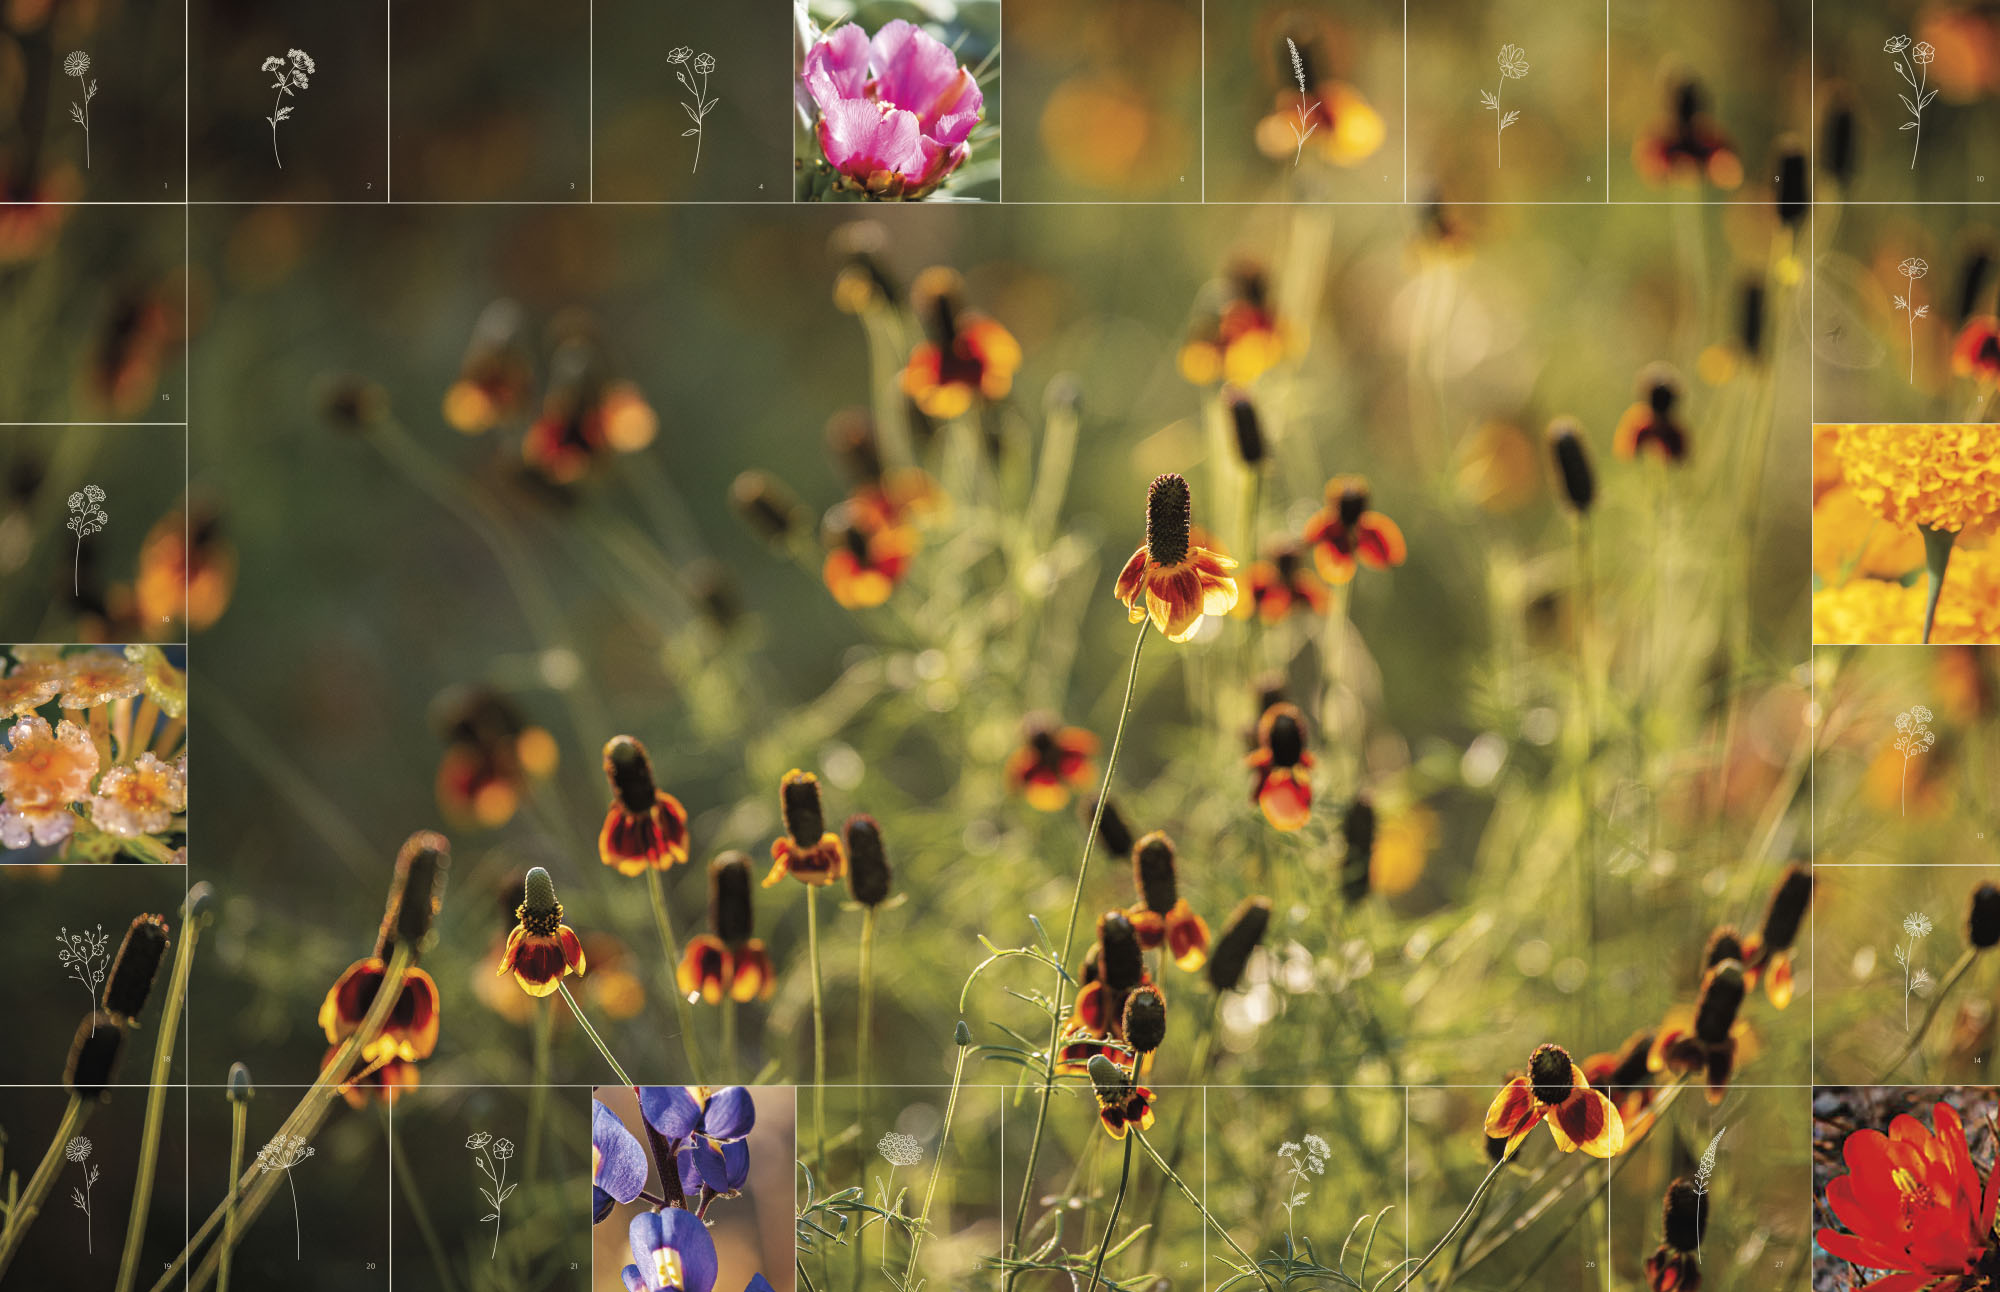 A scene of Mexican Hat wildflowers surrounded by small illustrations and photos of other wildflowers